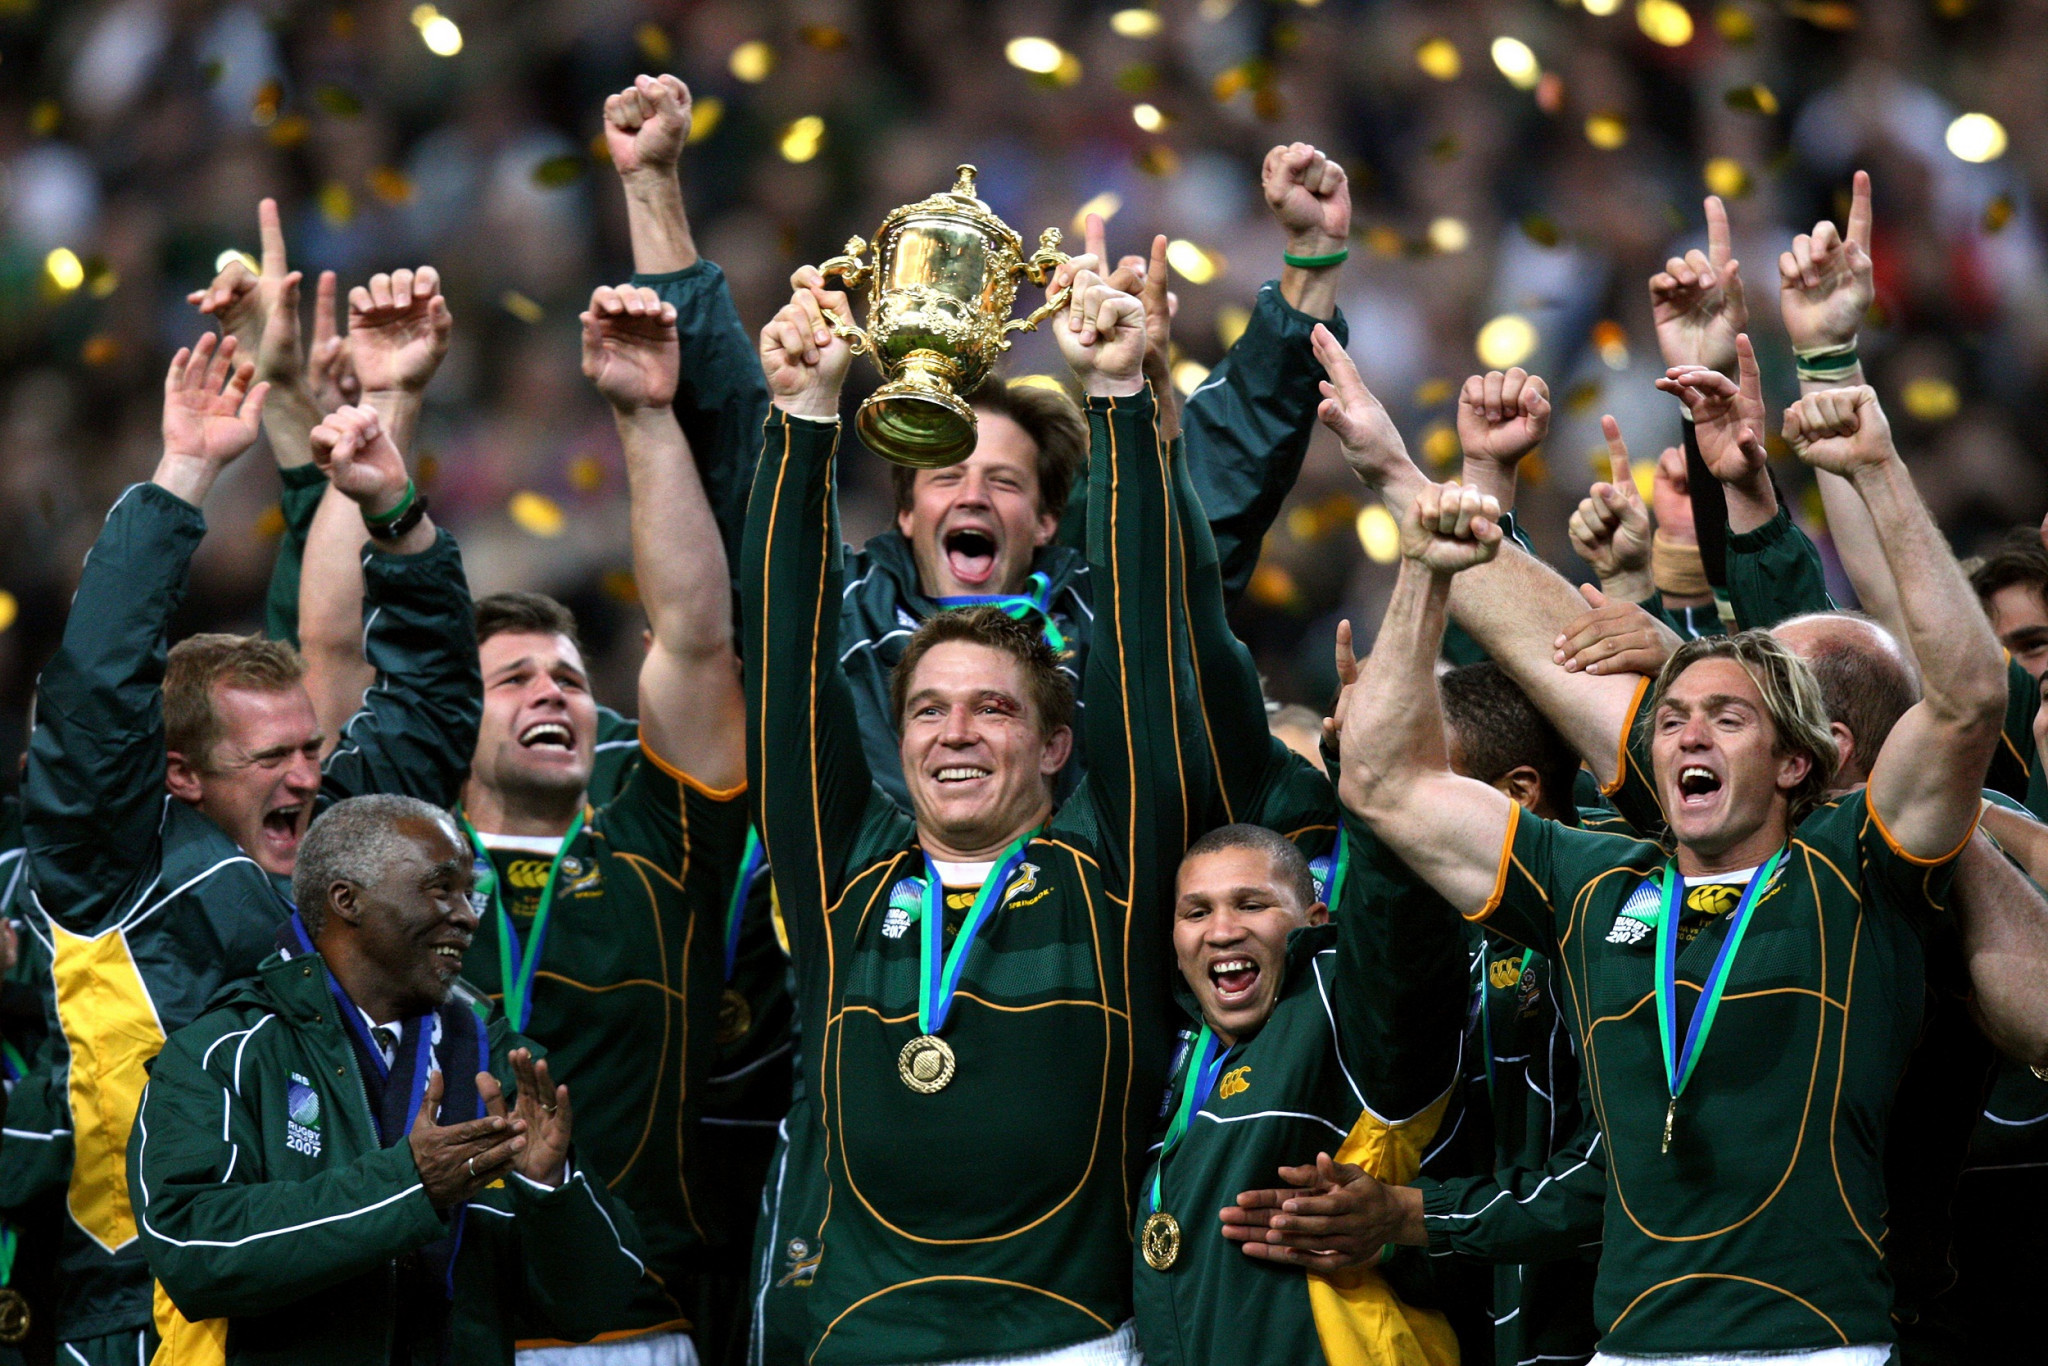 Newly re-elected South African Rugby Union President Mark Alexander has admitted the success of his tenure will be judged on how the Springboks perform at international level ©Getty Images